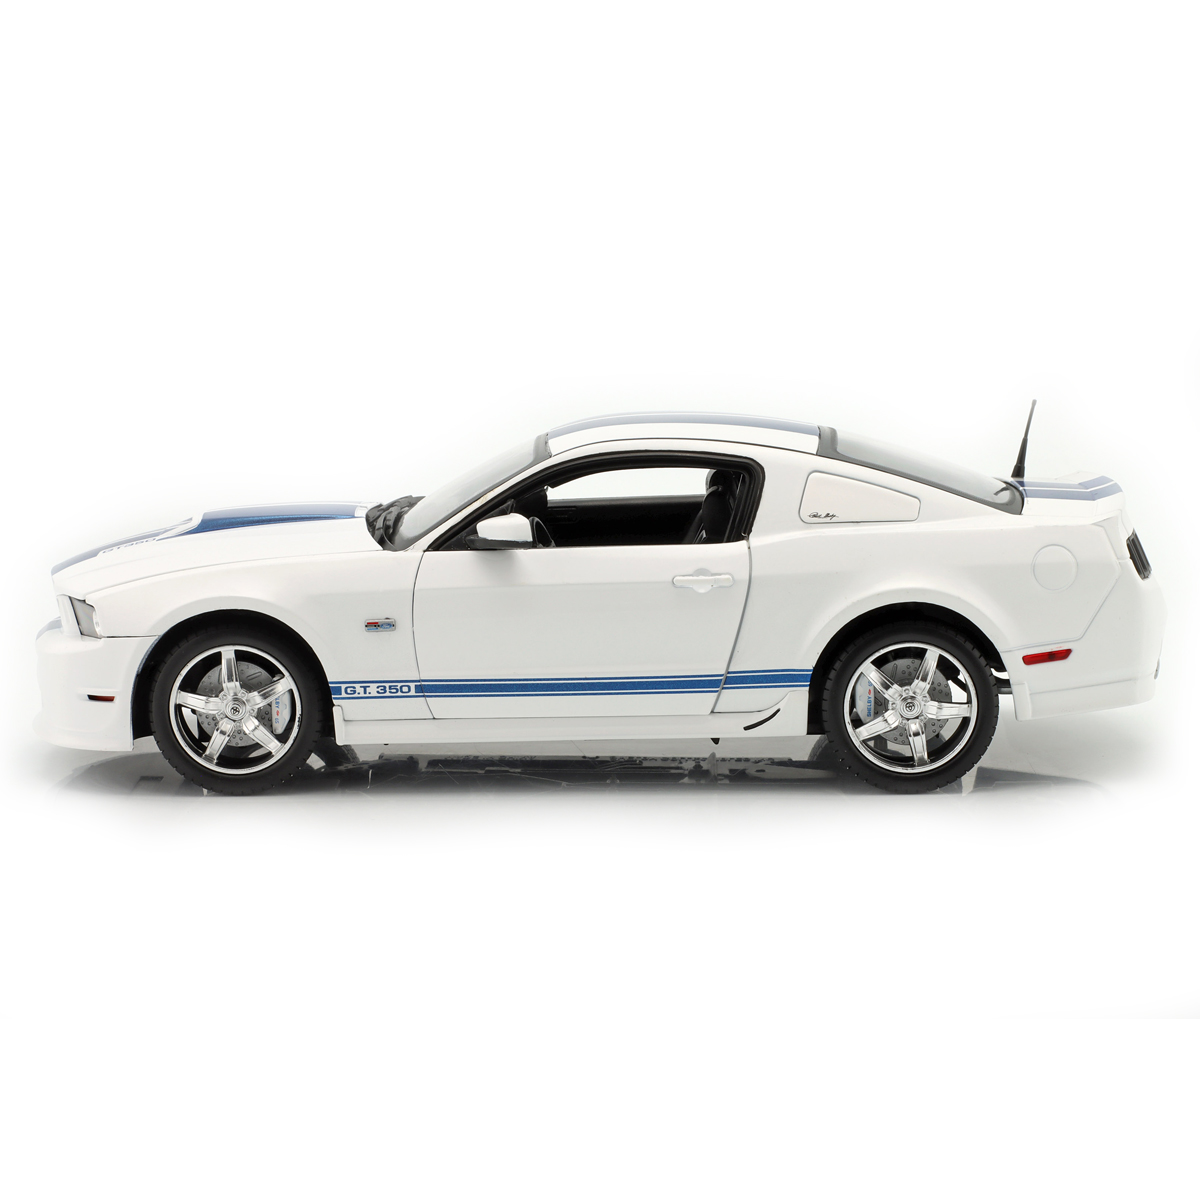 2011 Ford Shelby GT350 - Escala 1:18 - Shelby Collectibles